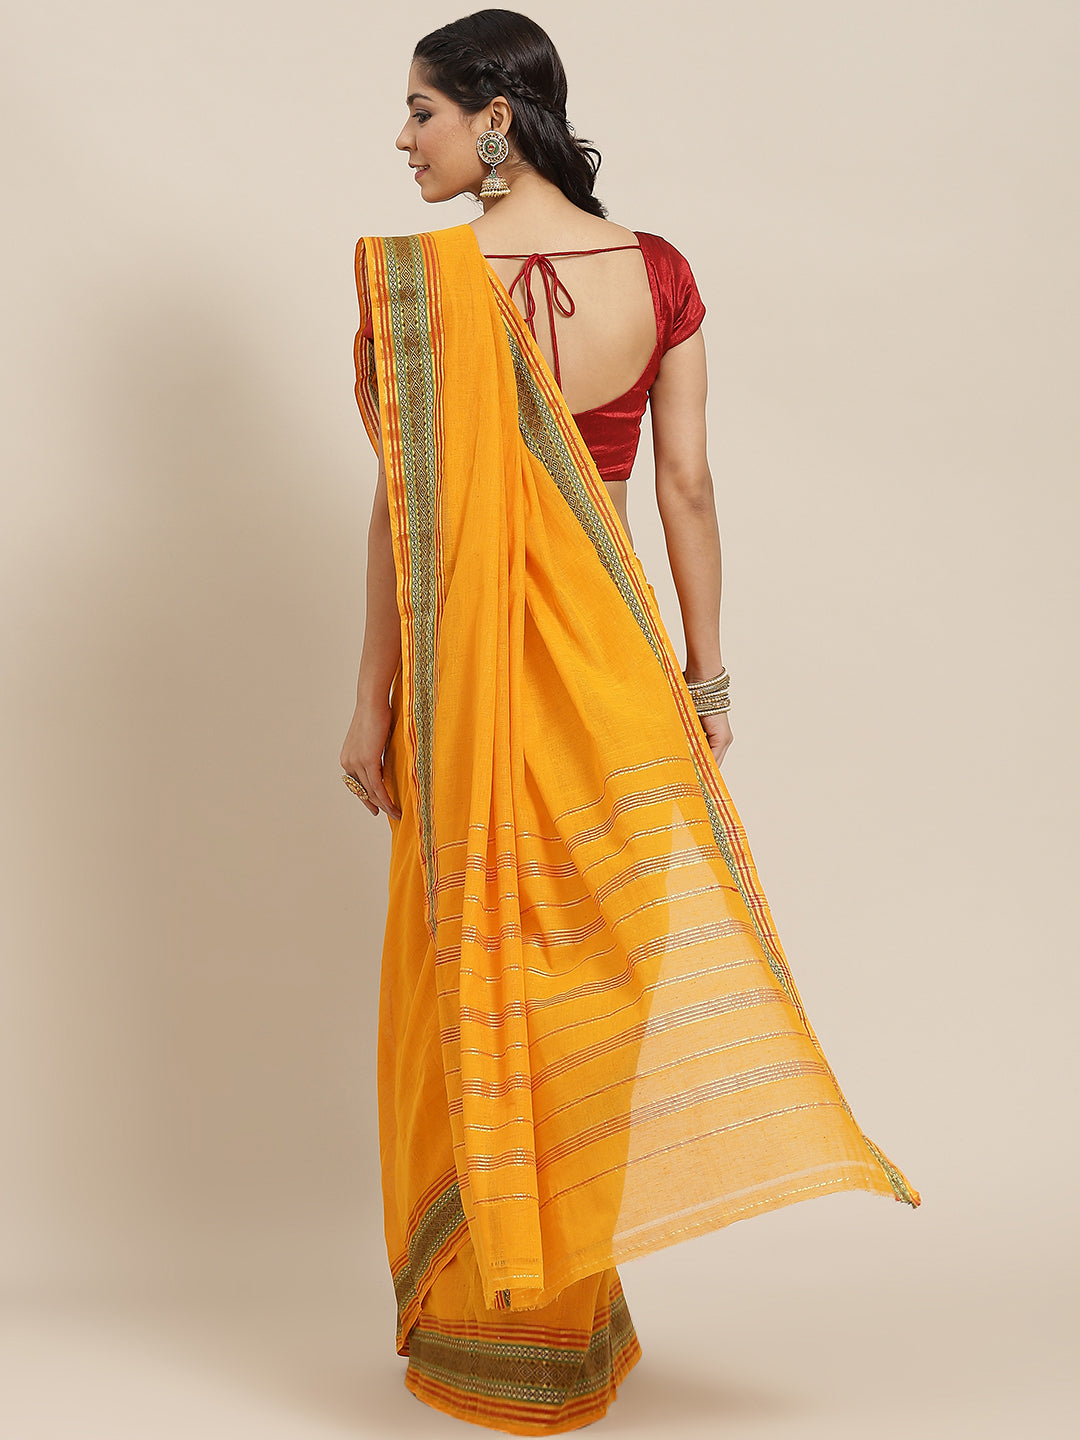 Ishin Women's Cotton Blend Mustard Solid Woven Saree With Blouse Piece